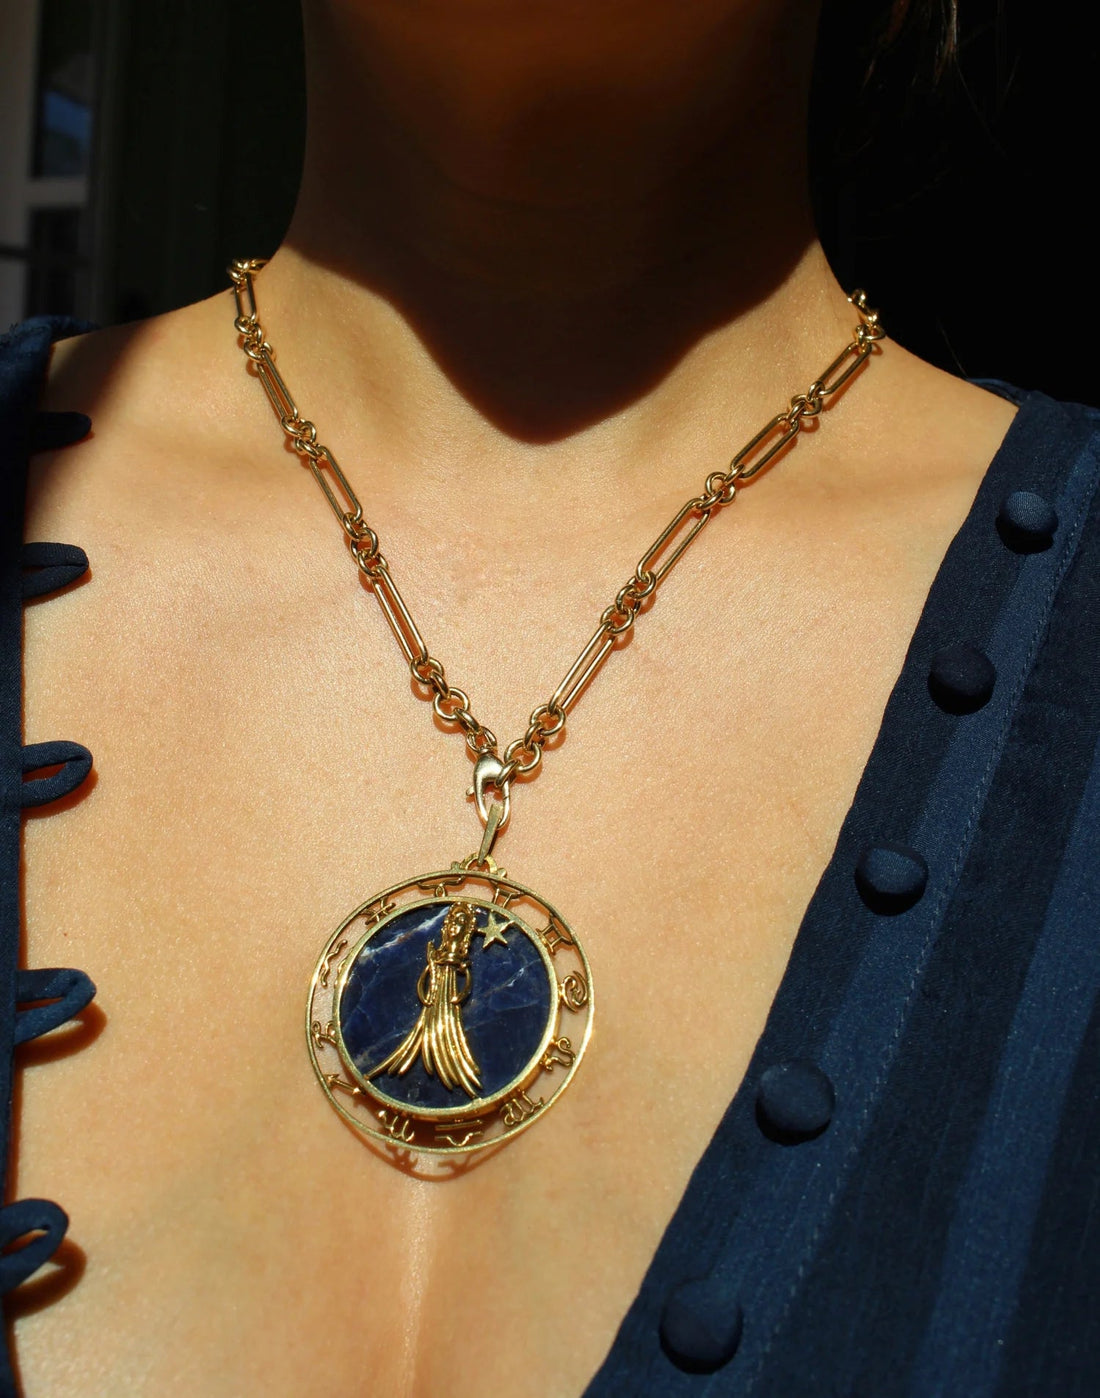 SYMBOLIC JEWELRY:  A Reflection of Life's Philosophy